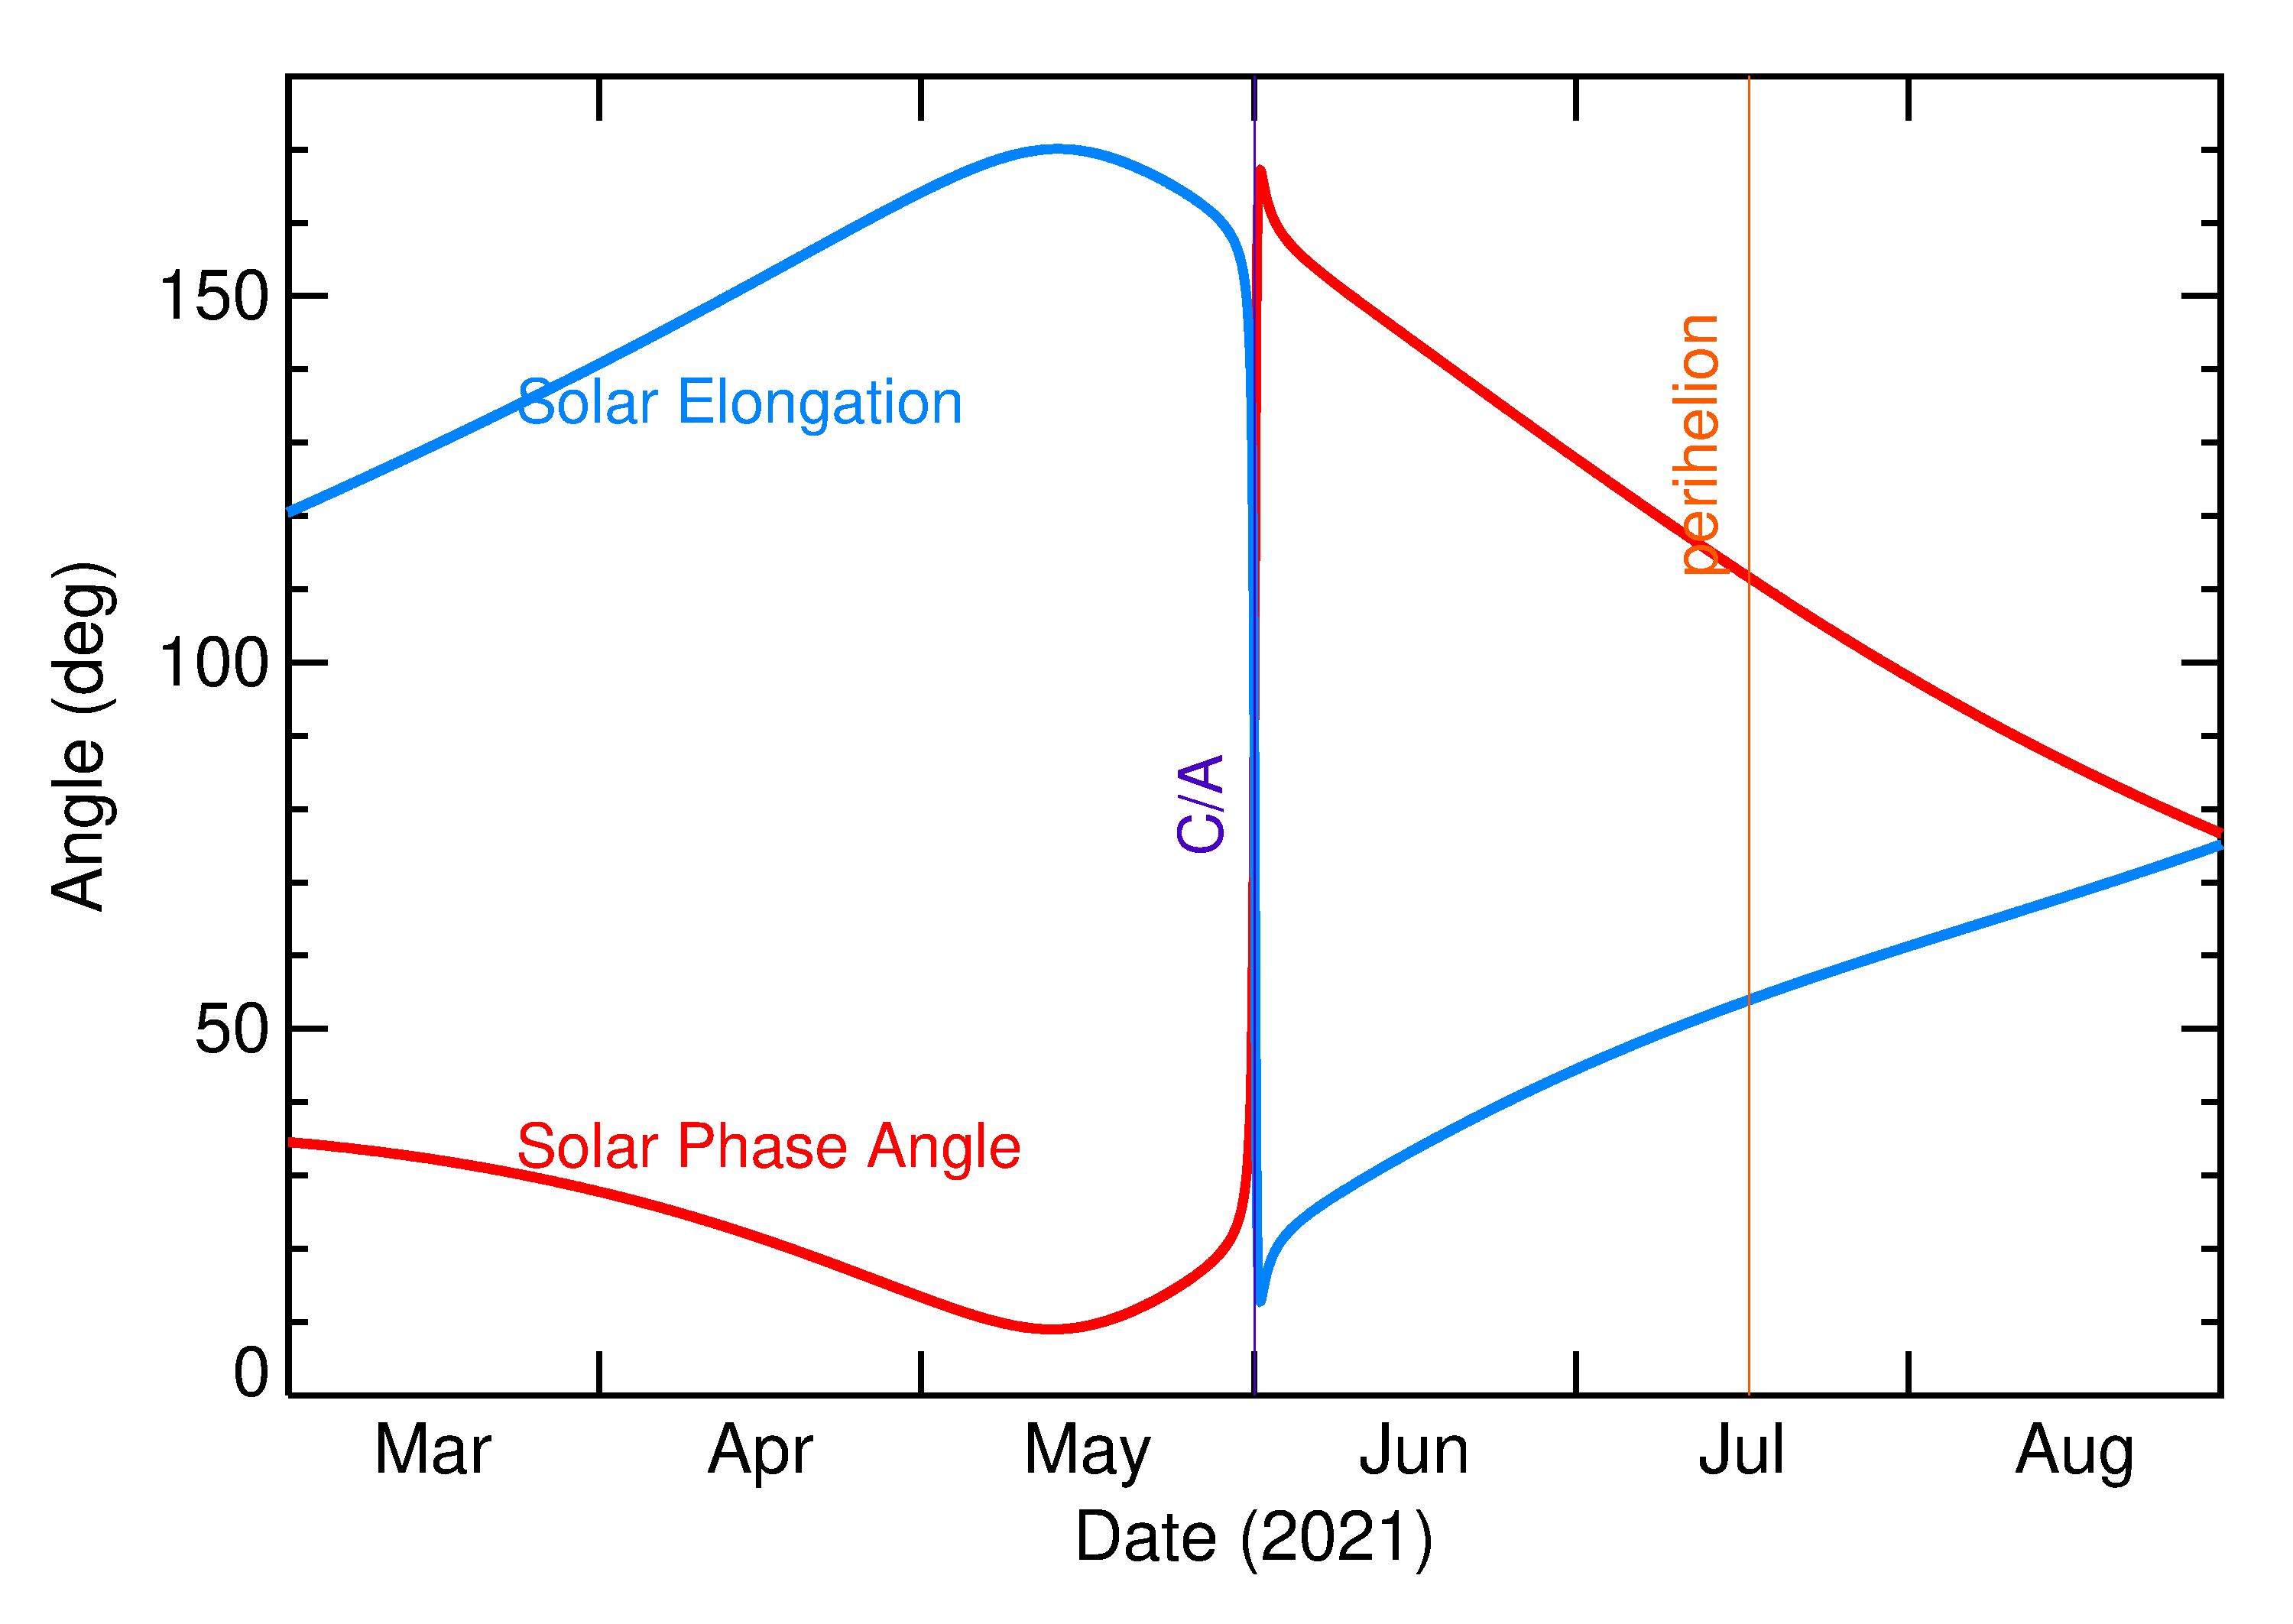 Solar Elongation and Solar Phase Angle of 2021 KN2 in the months around closest approach